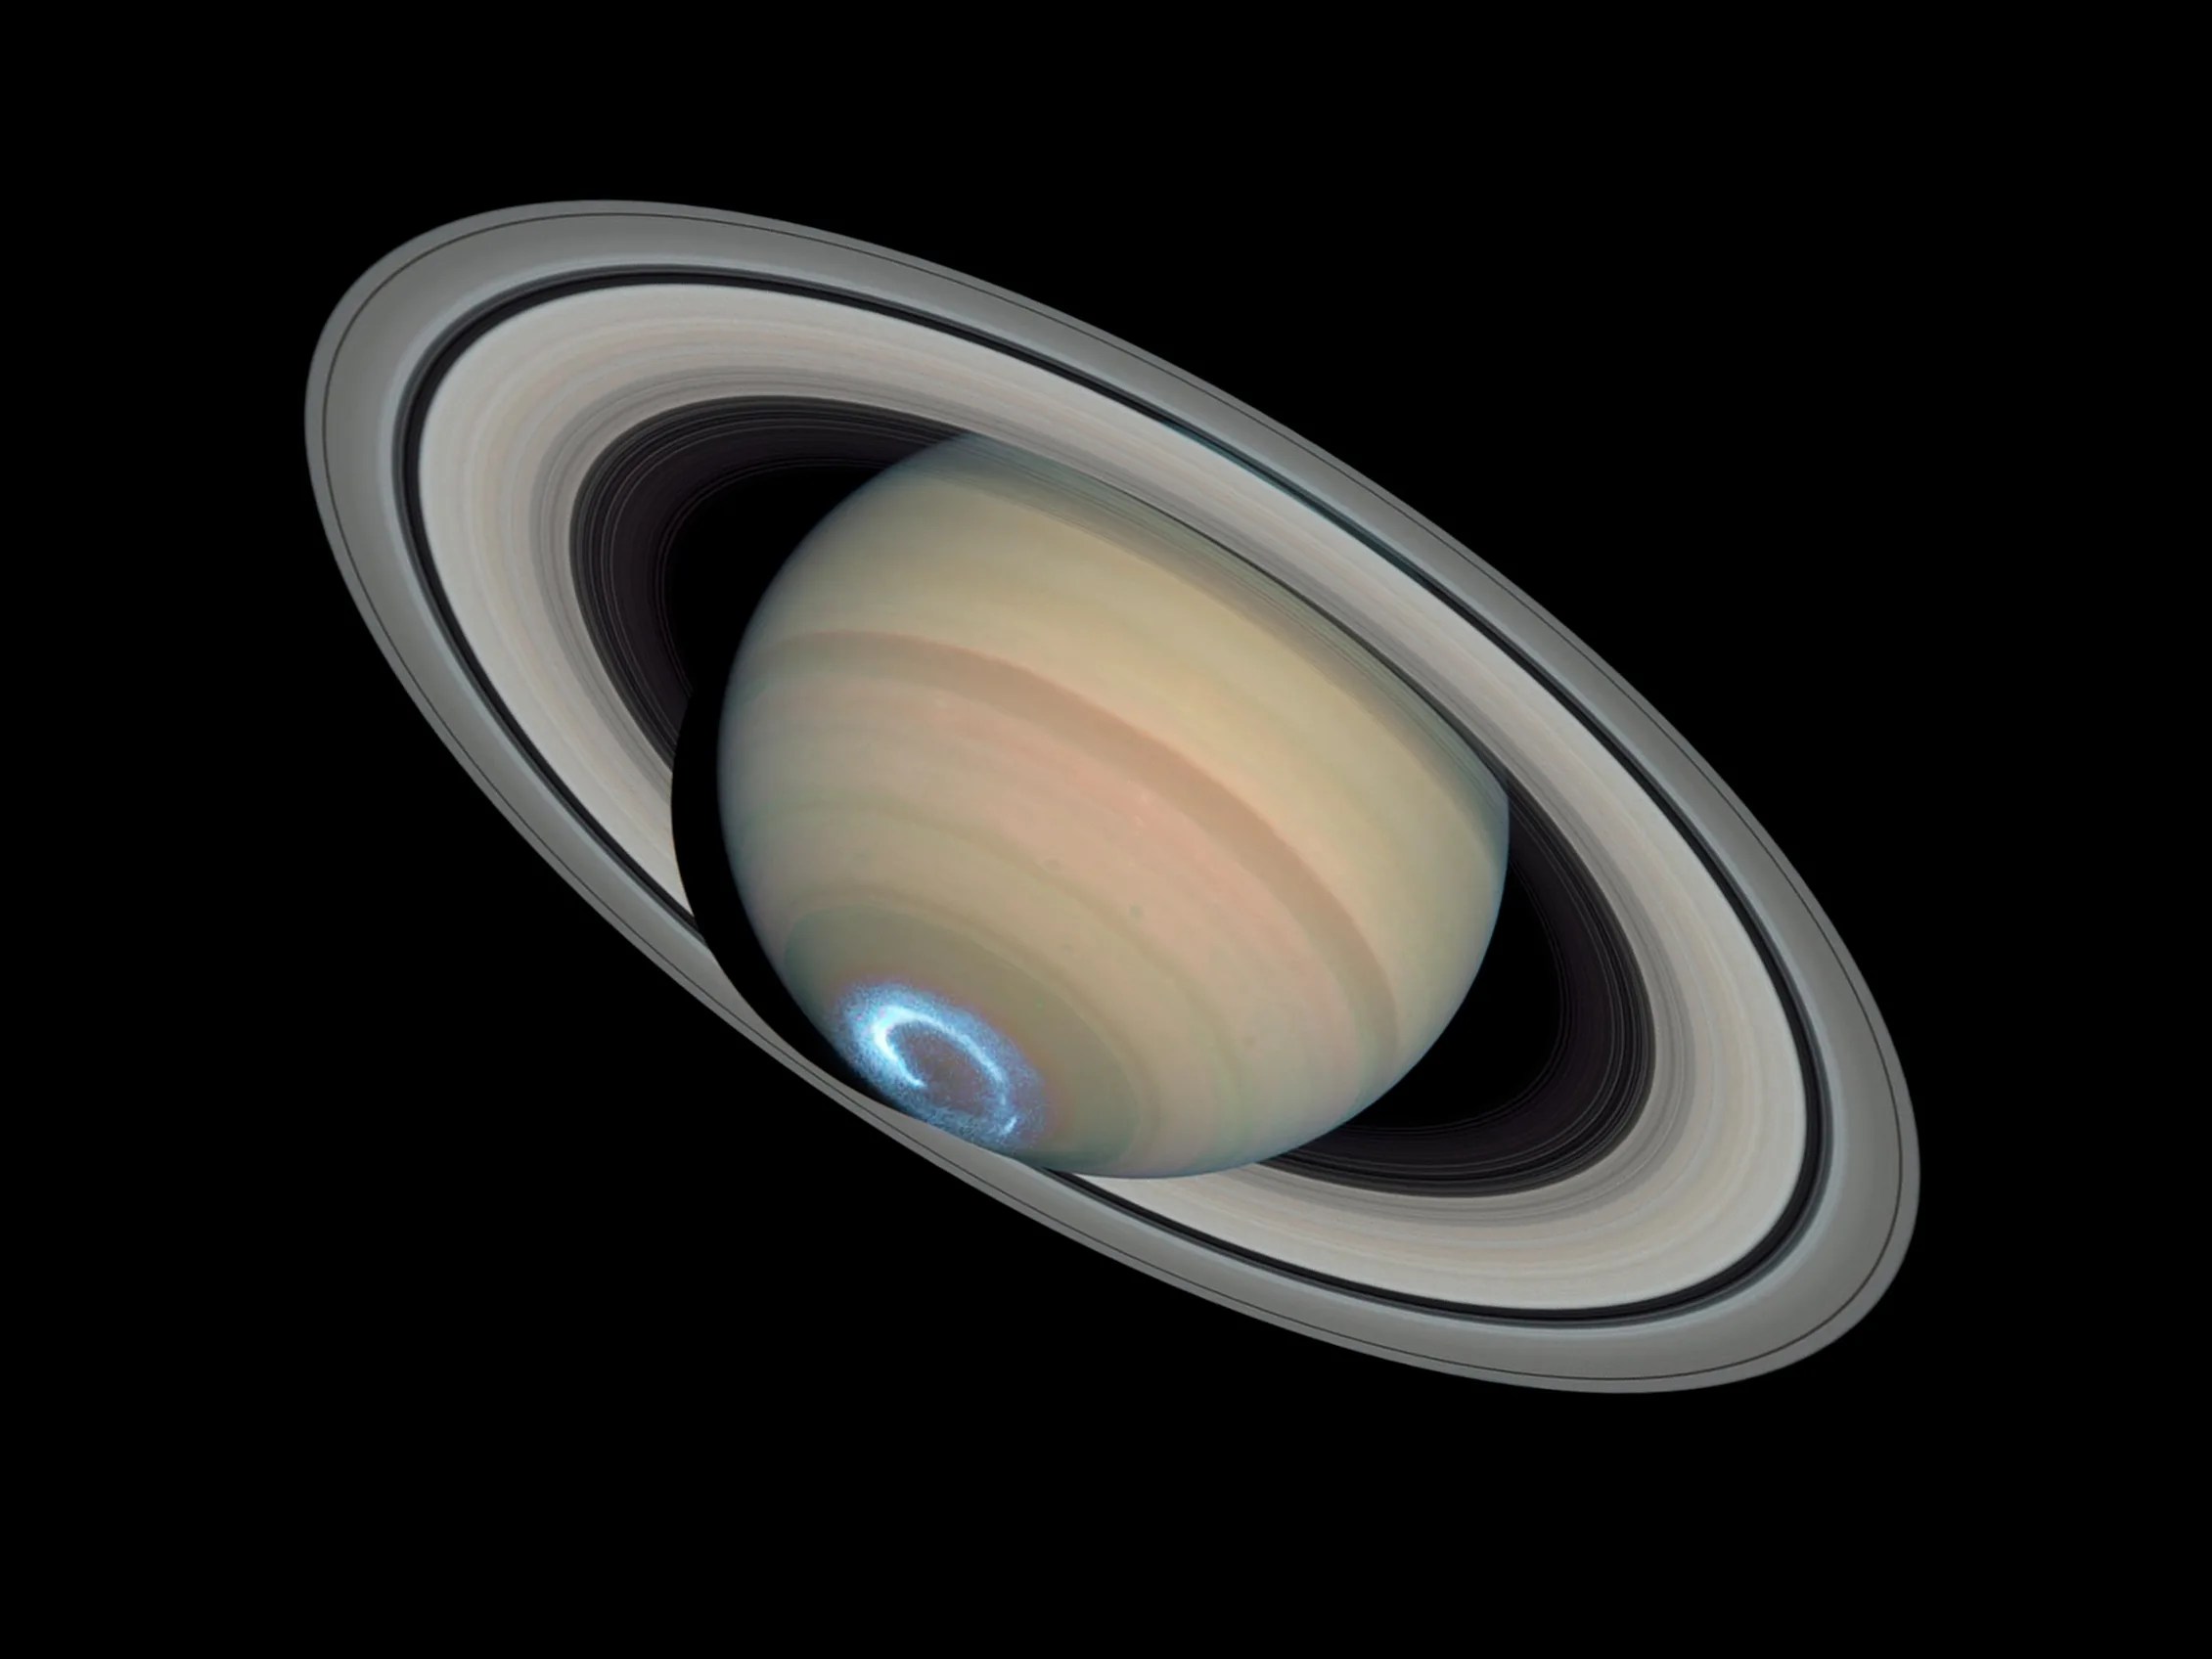 Yellow, rust, and white bands visible on Saturn. The planet is tilted, such that its rings extend from upper-left to lower-right. A blue-white, glowing ring (the auroras) is visible at the bottom of the planet's sphere. All on a black background.